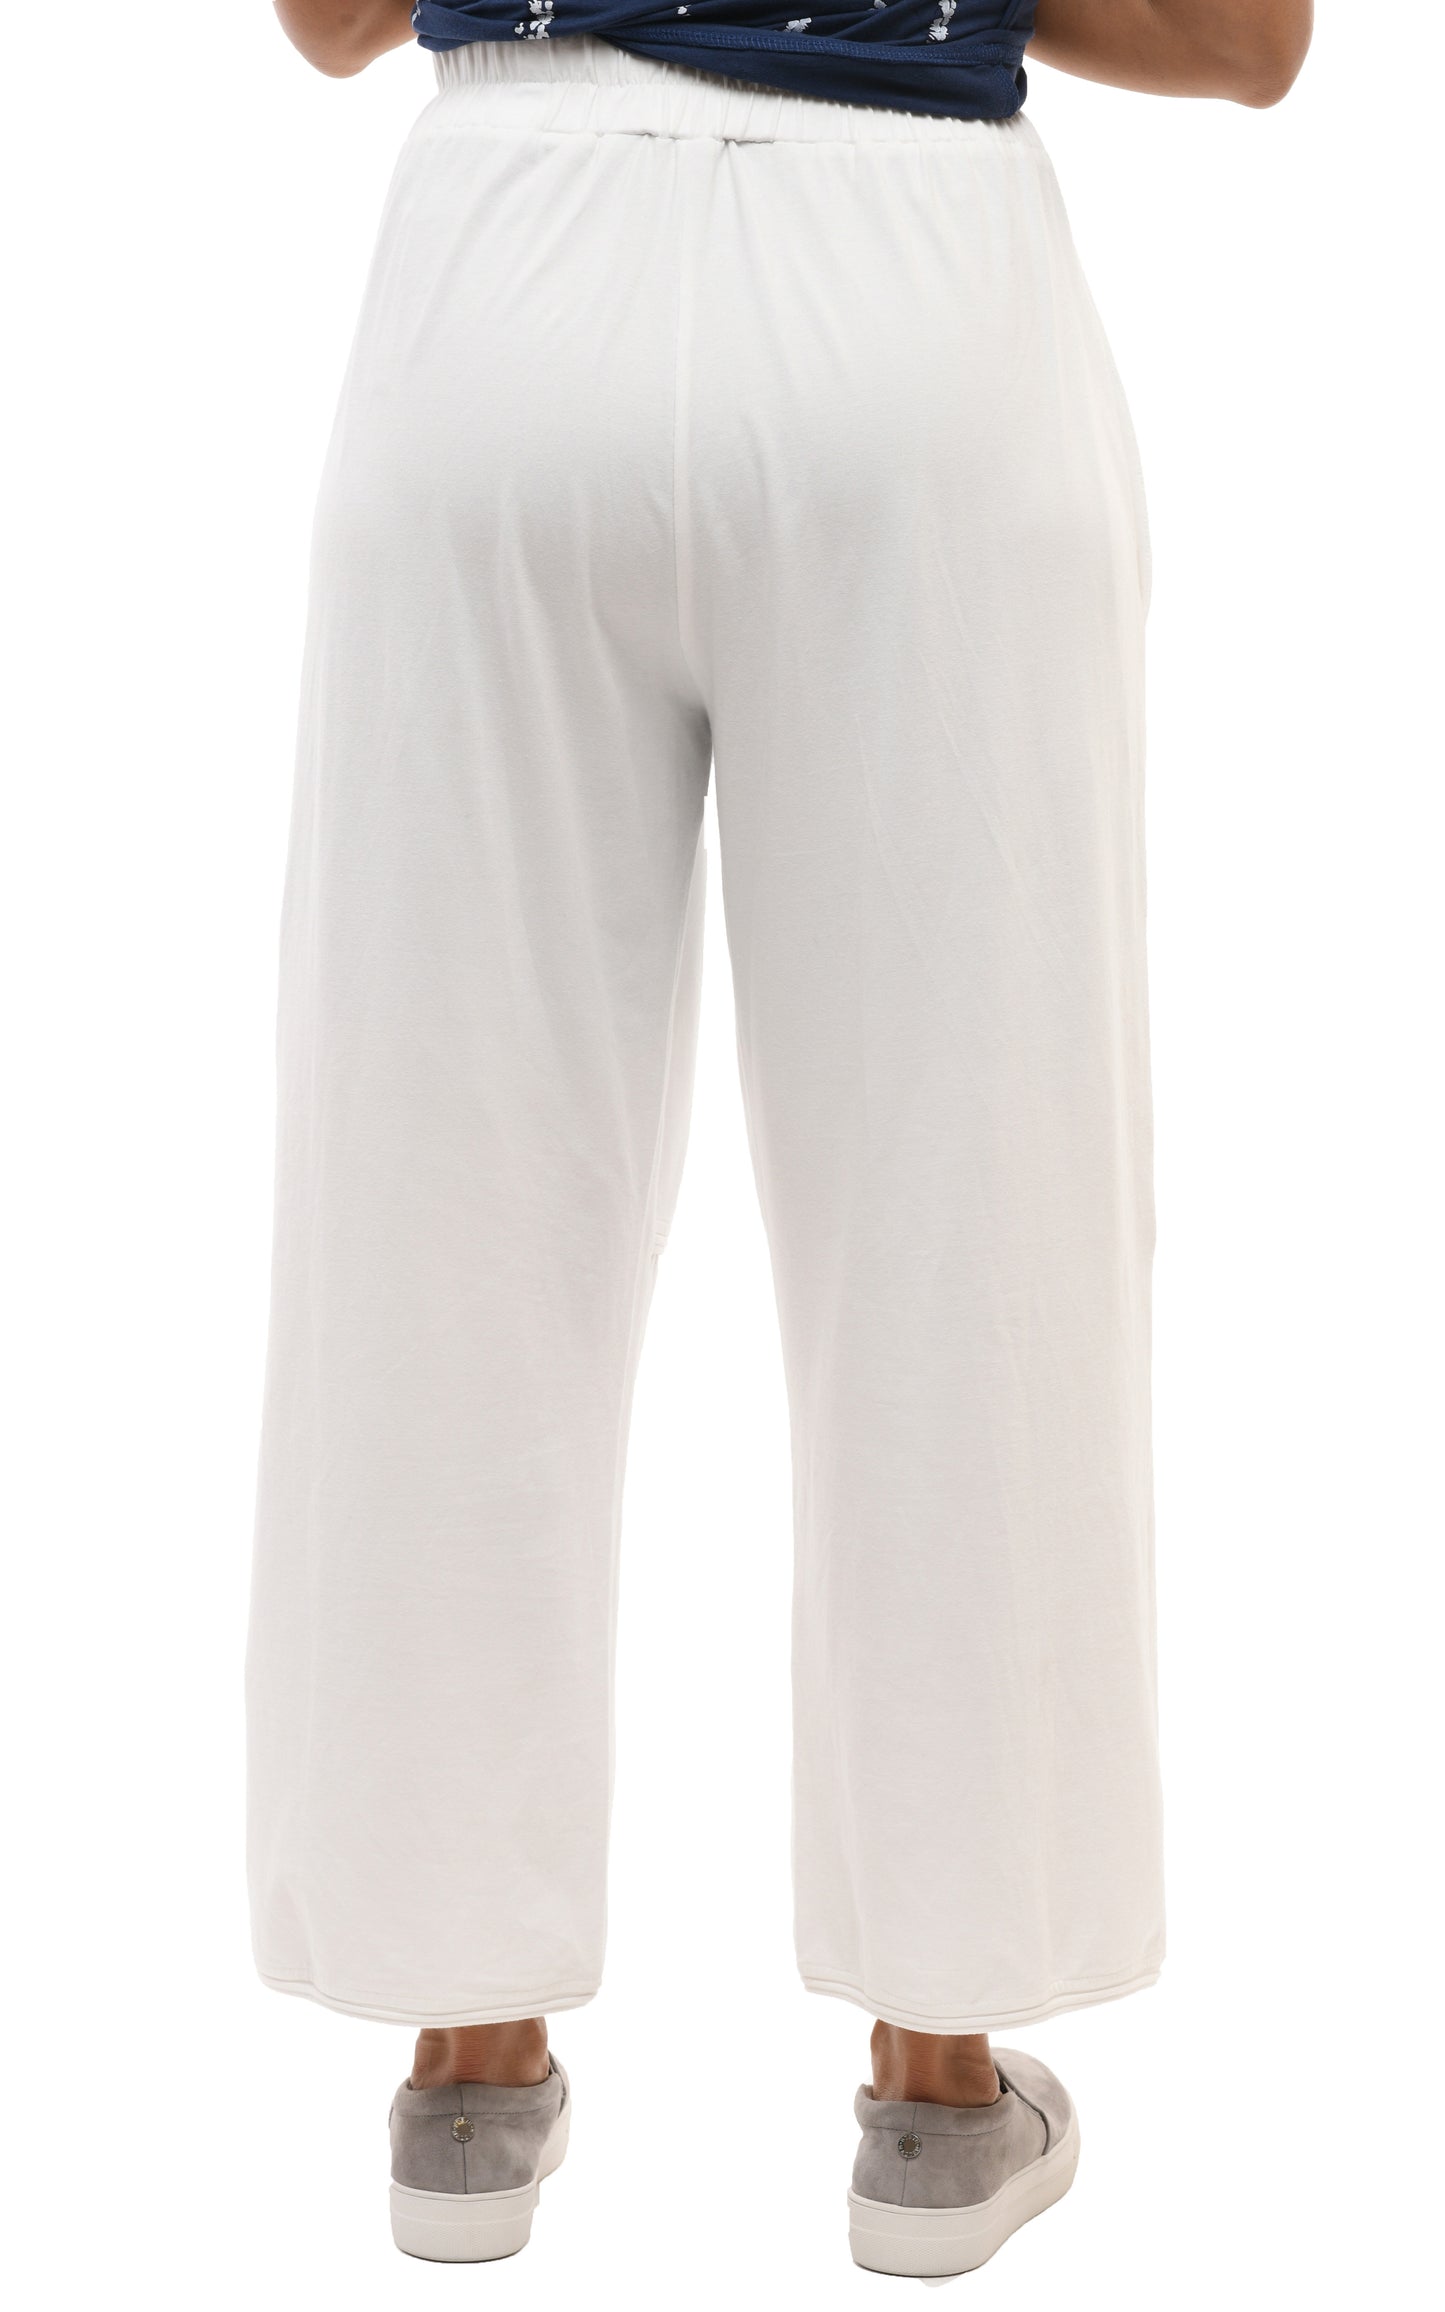 SDM328 Laila Lounge Pant in Cream Cotton by Snapdragon & Twig (Modal)